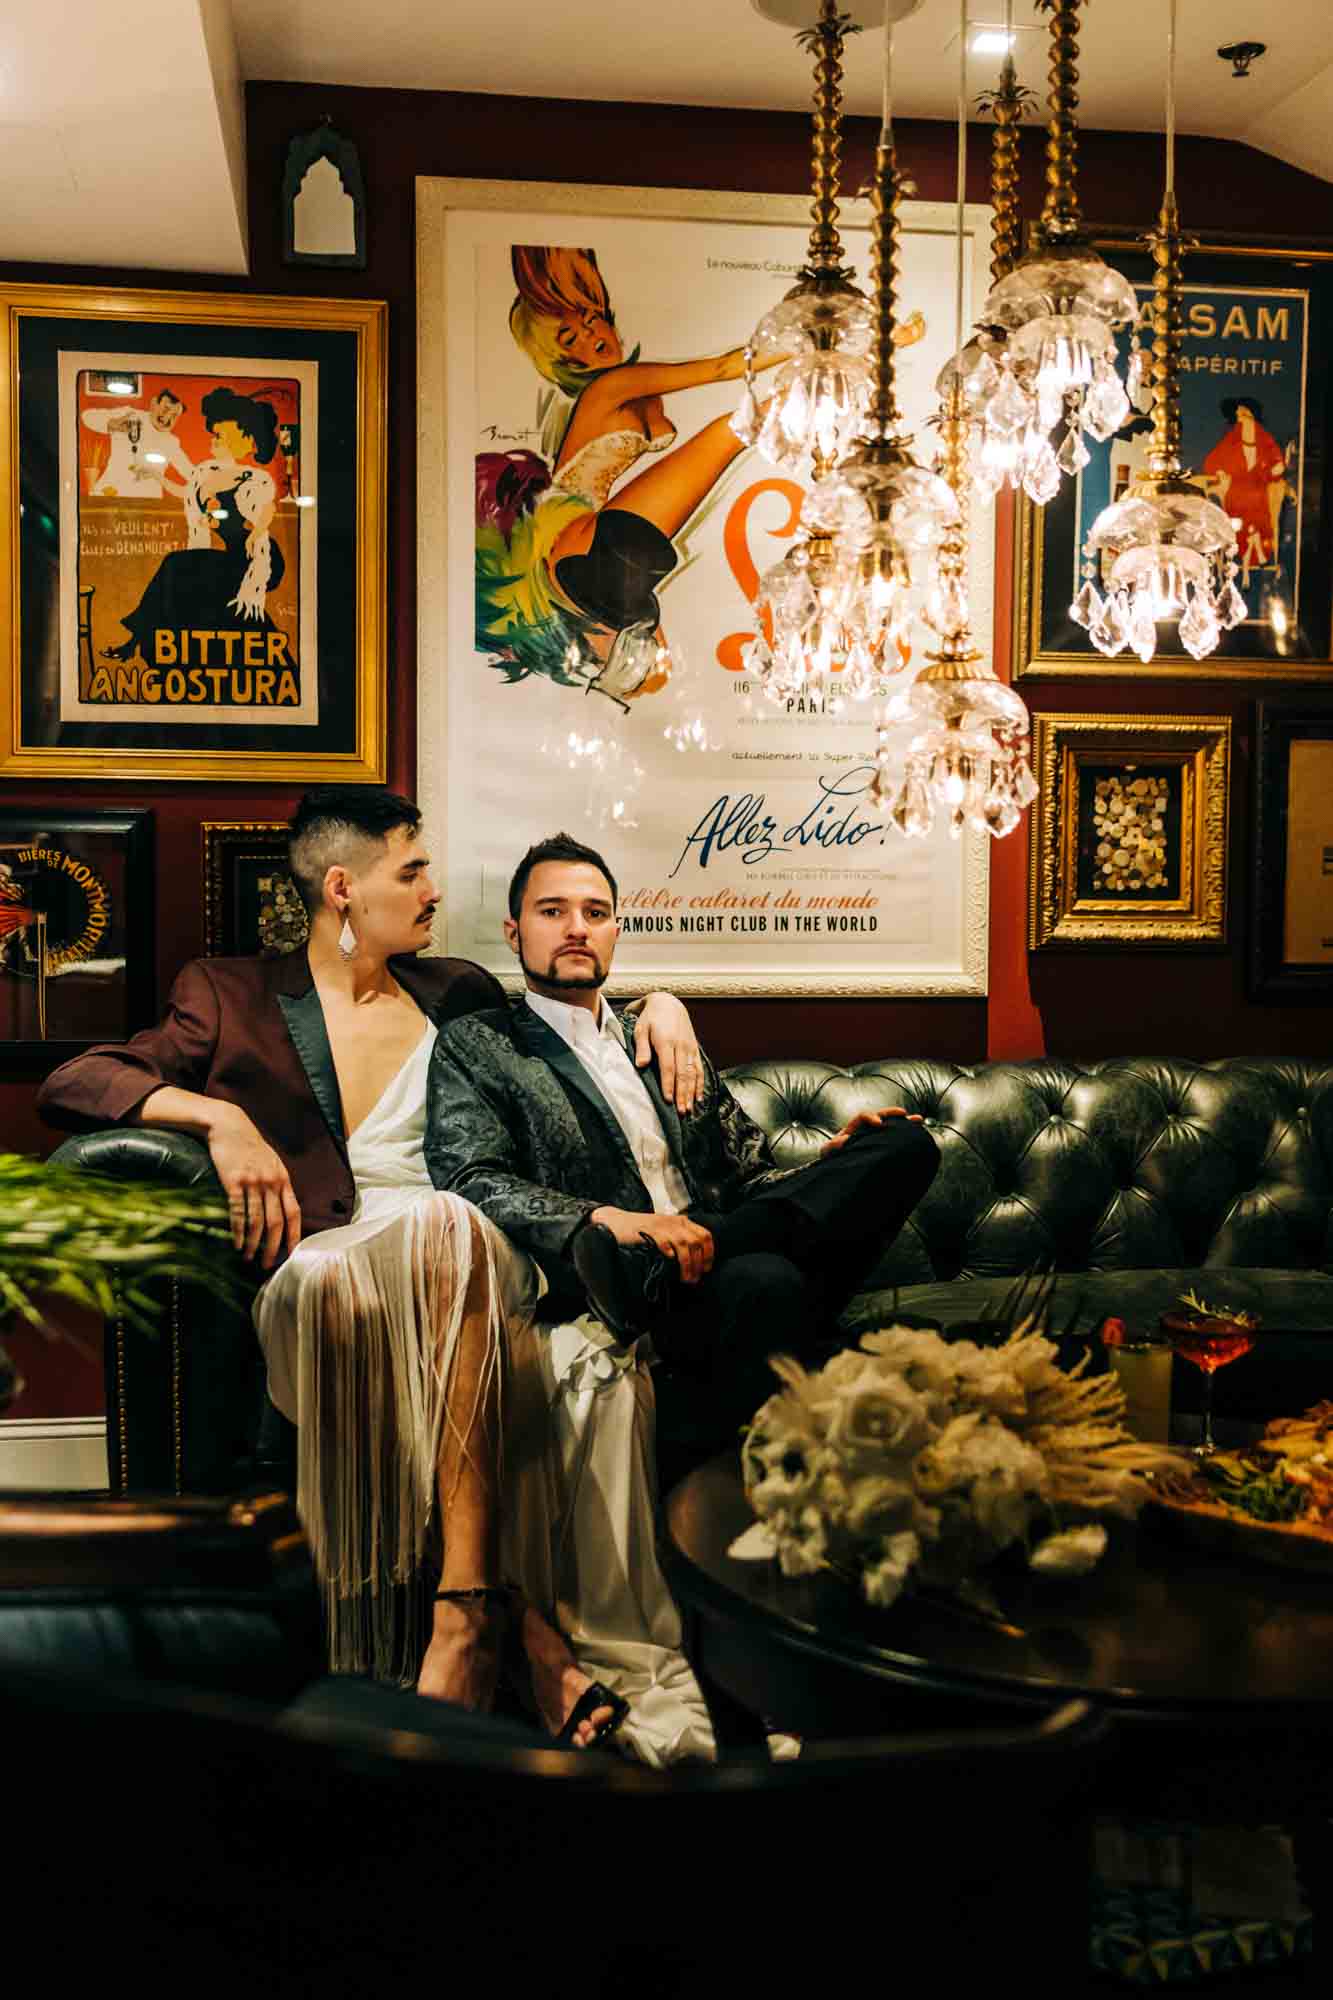  Speakeasy wedding inspiration featuring elegance, style and glorious gender fluidity |Rebecca Stone Photography | Featured on Equally Wed, the leading LGBTQ+ wedding magazine 